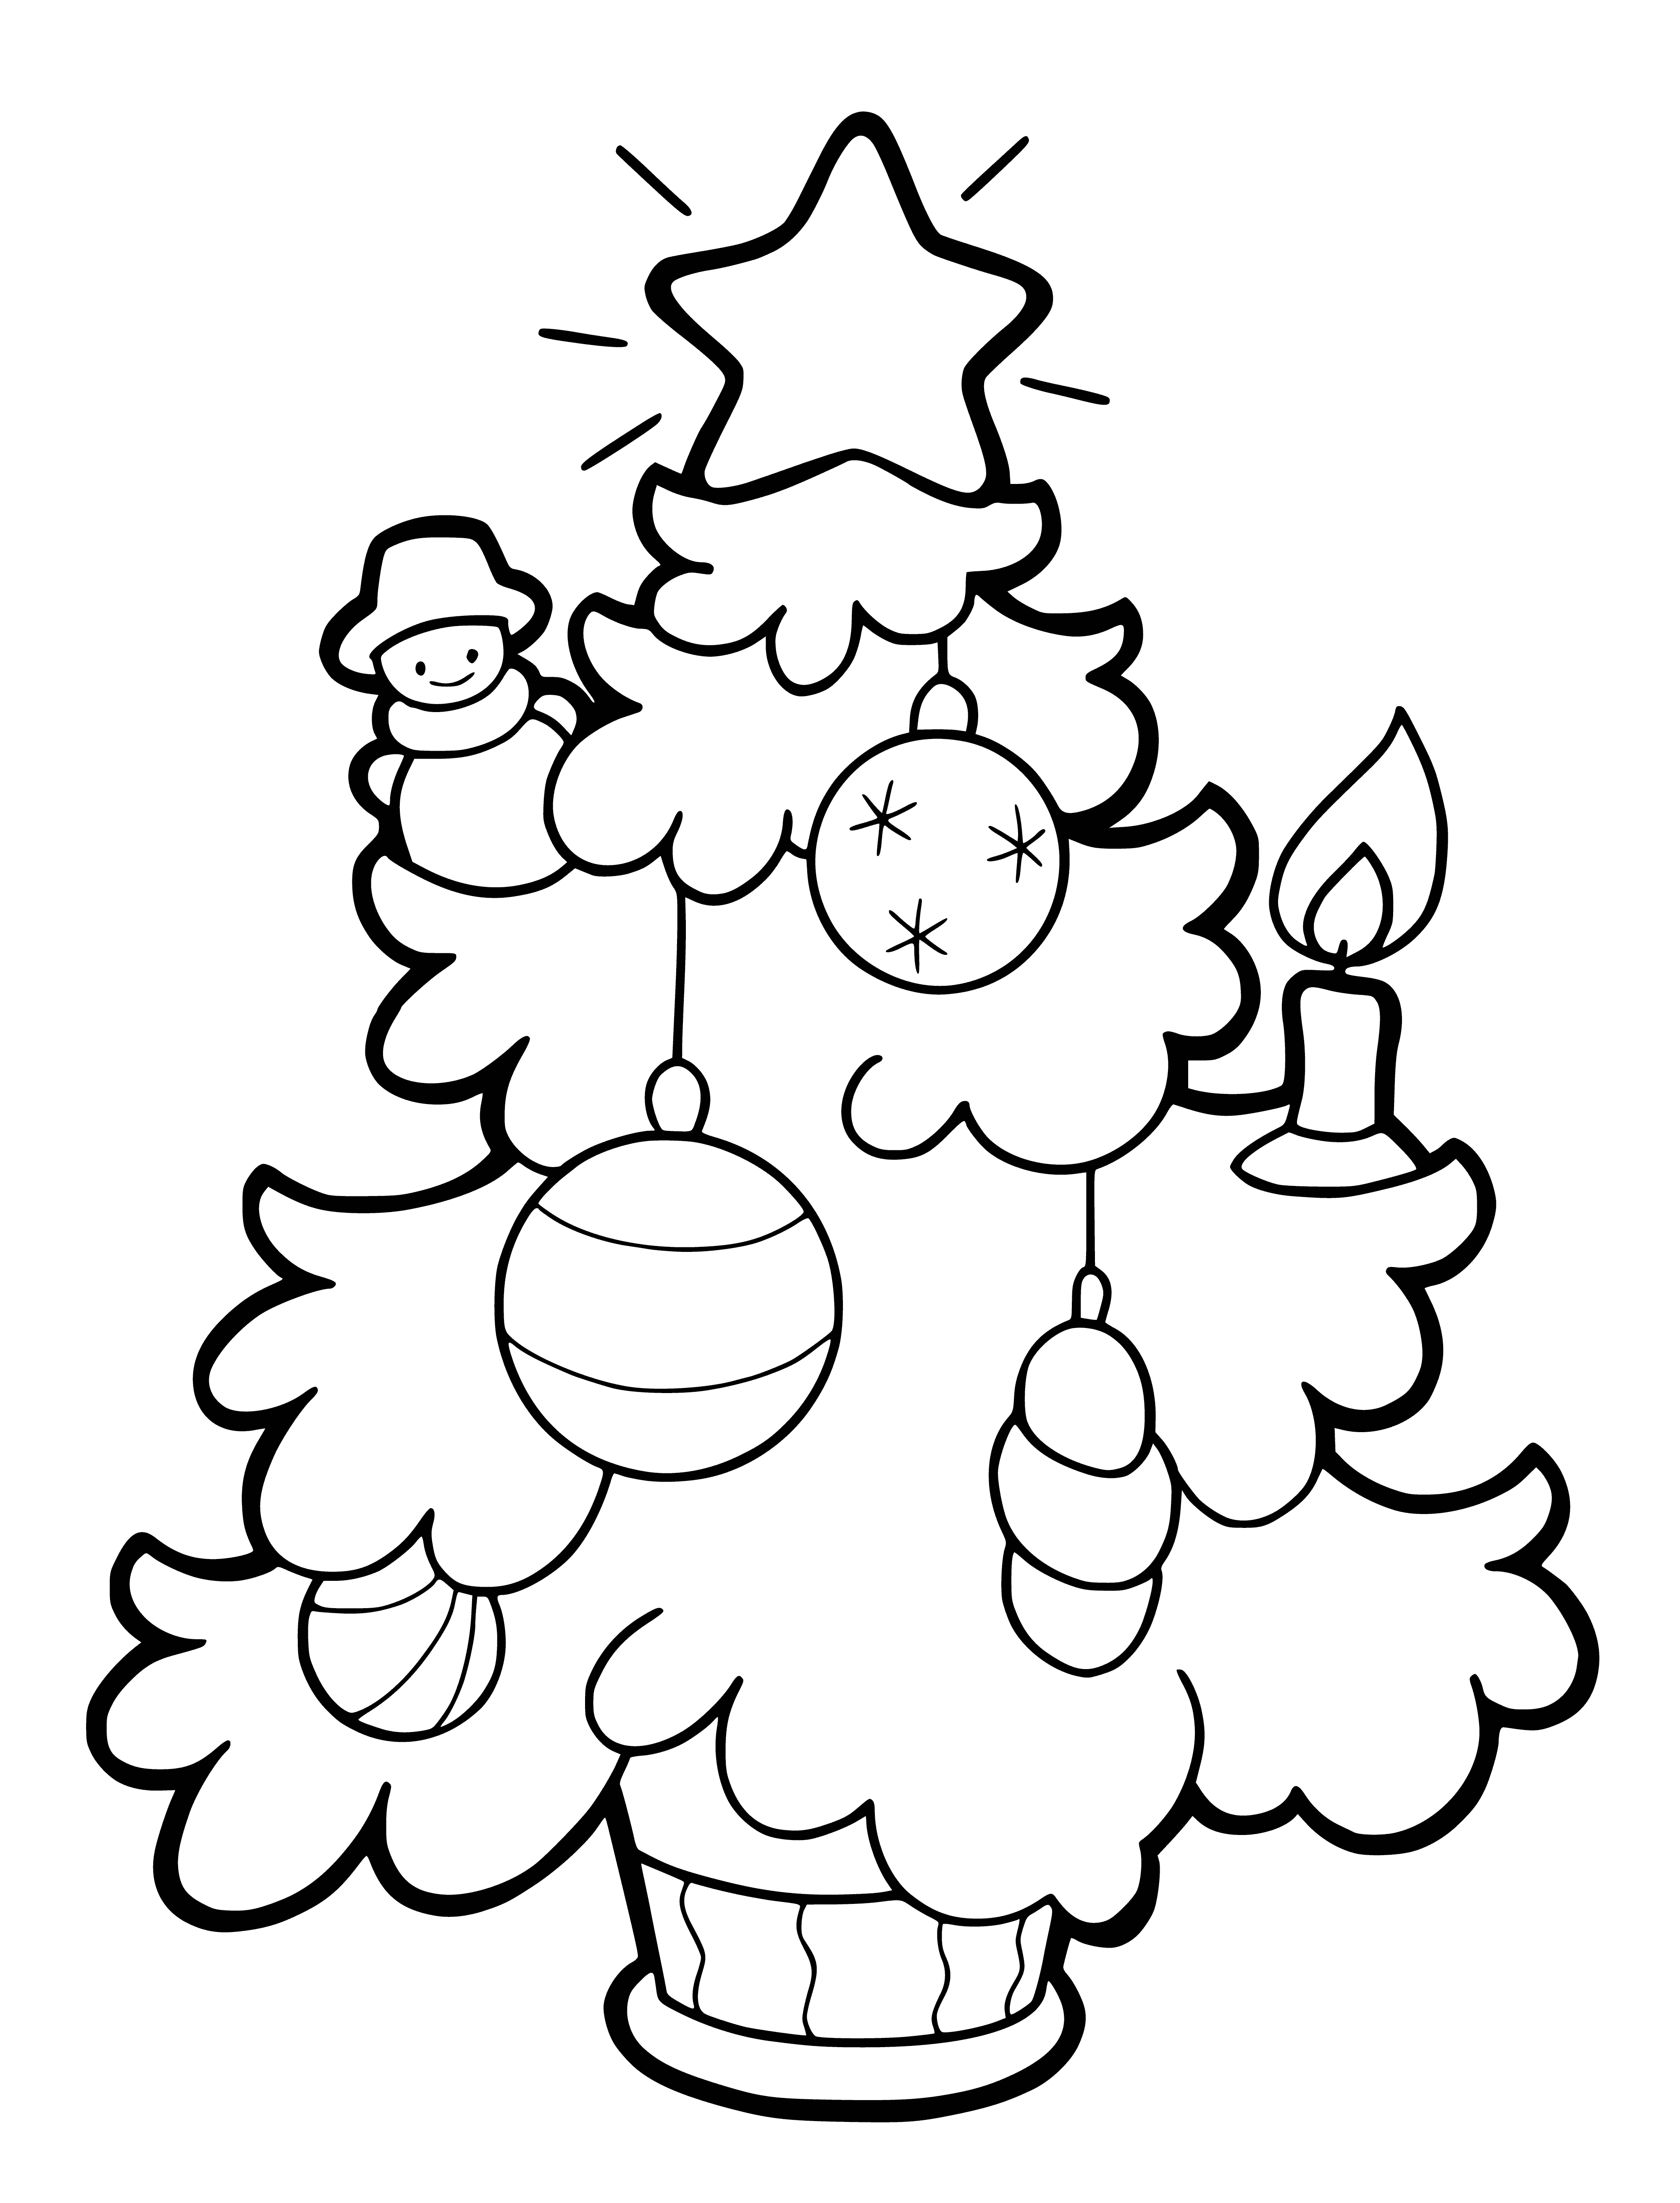 coloring page: Colorful Christmas tree with ornaments, garland, & star on top, with presents underneath. #ChristmasDecoration #ColoringPage